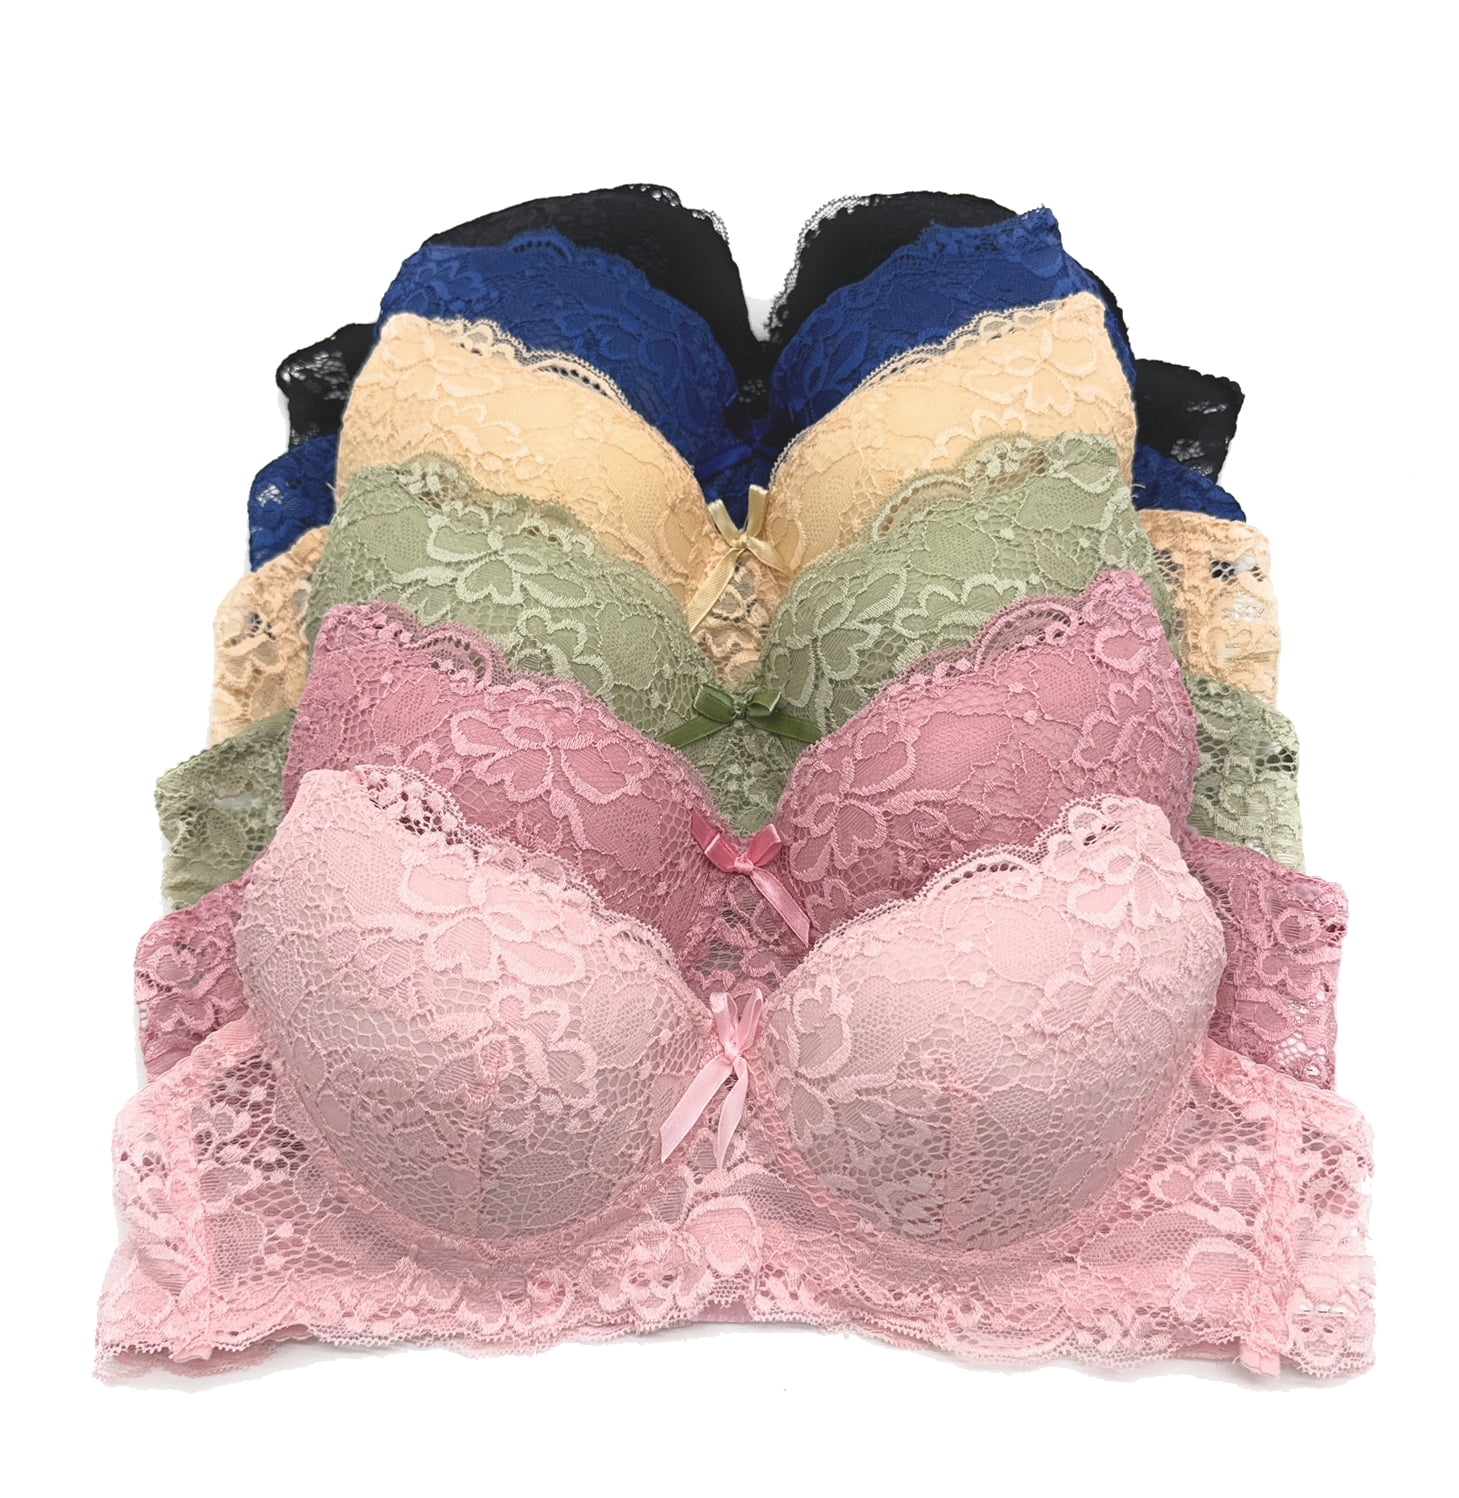 6 pieces of Pushup Underwired Lace Lady's Gentle Push Up Bra A B C Cup 30A  (1007-64RE3) 